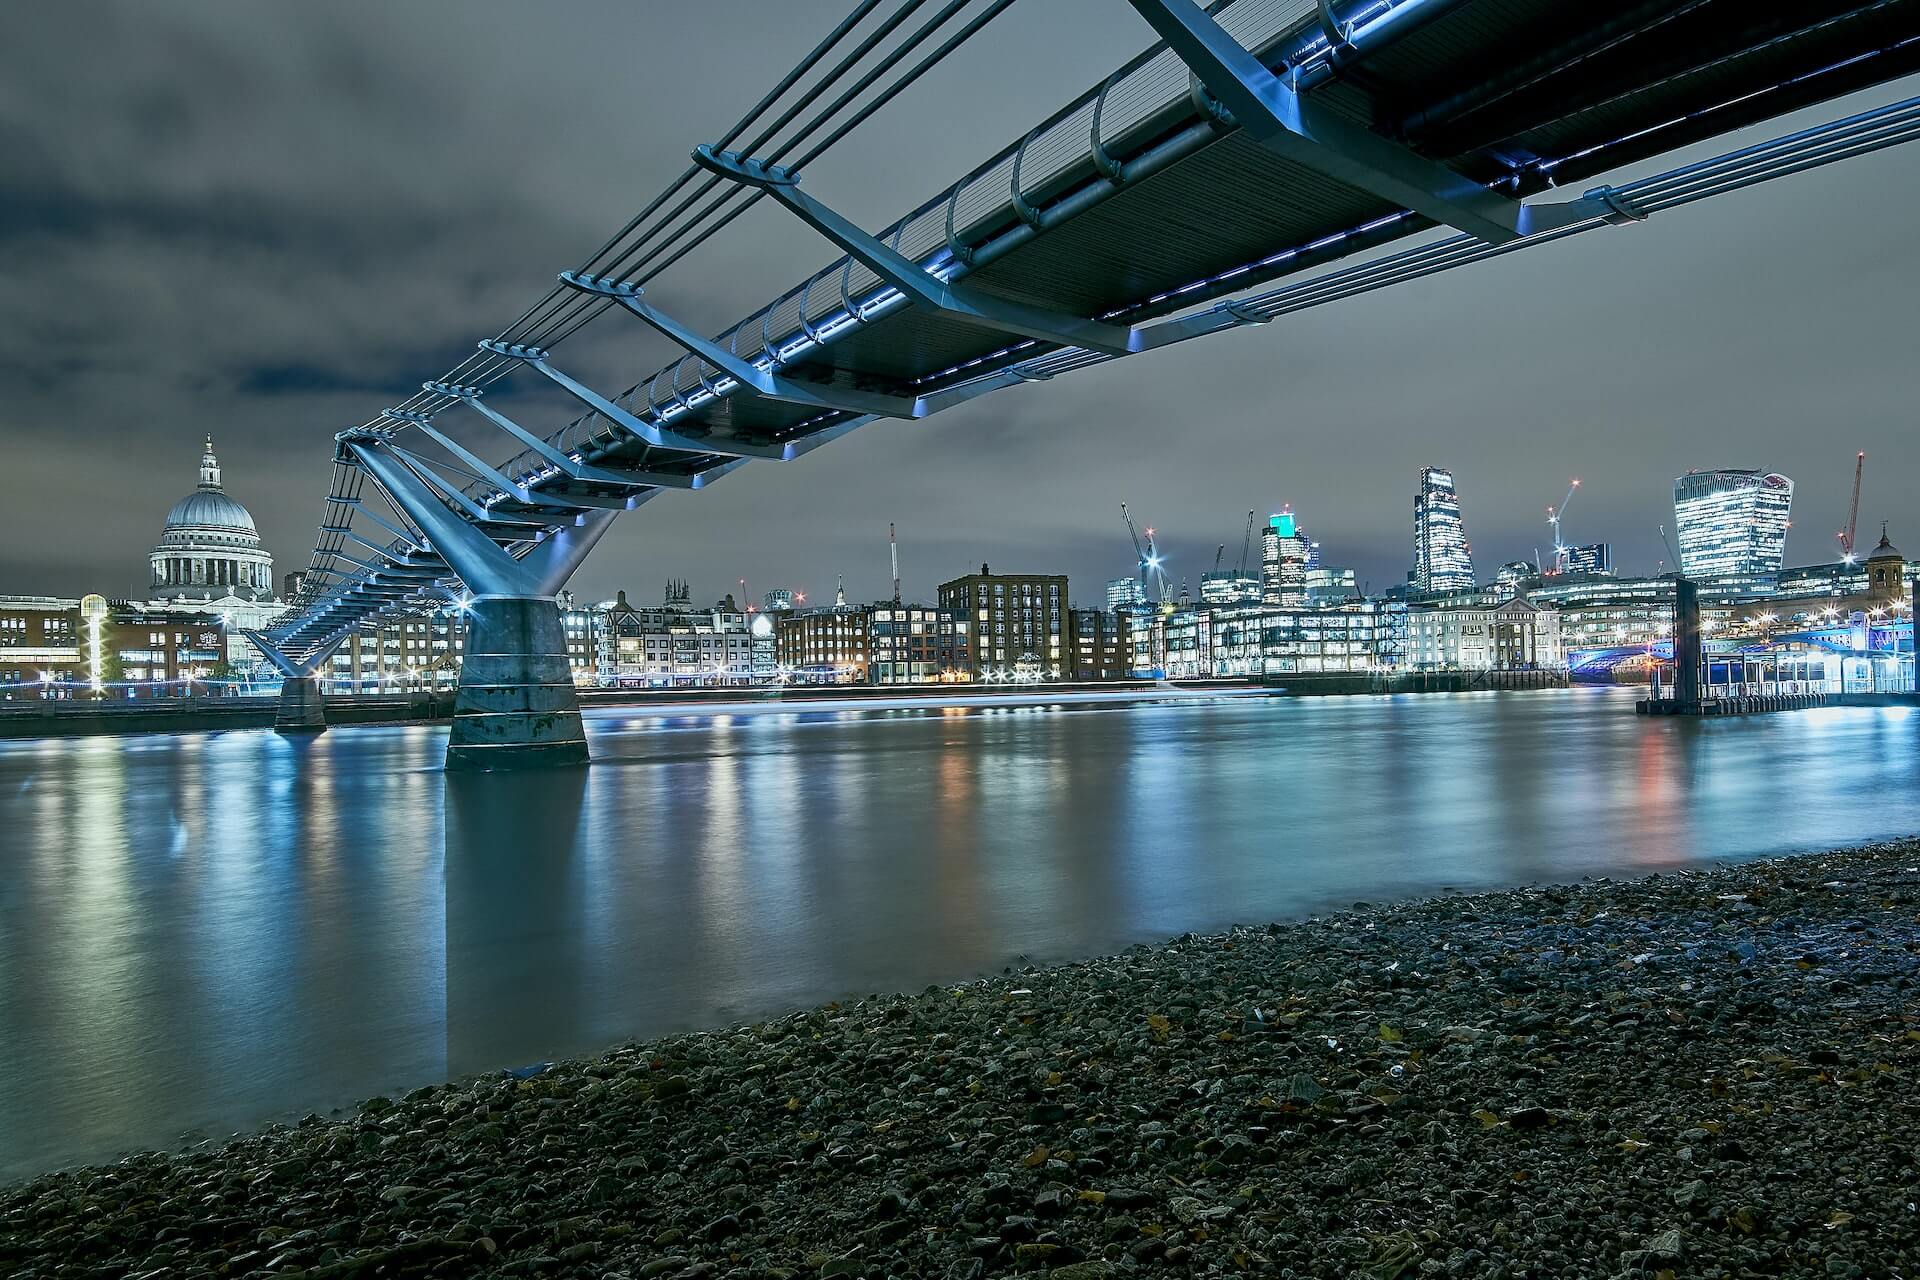 Looking out towards the City of London with the Millennium Bridge in the foreground